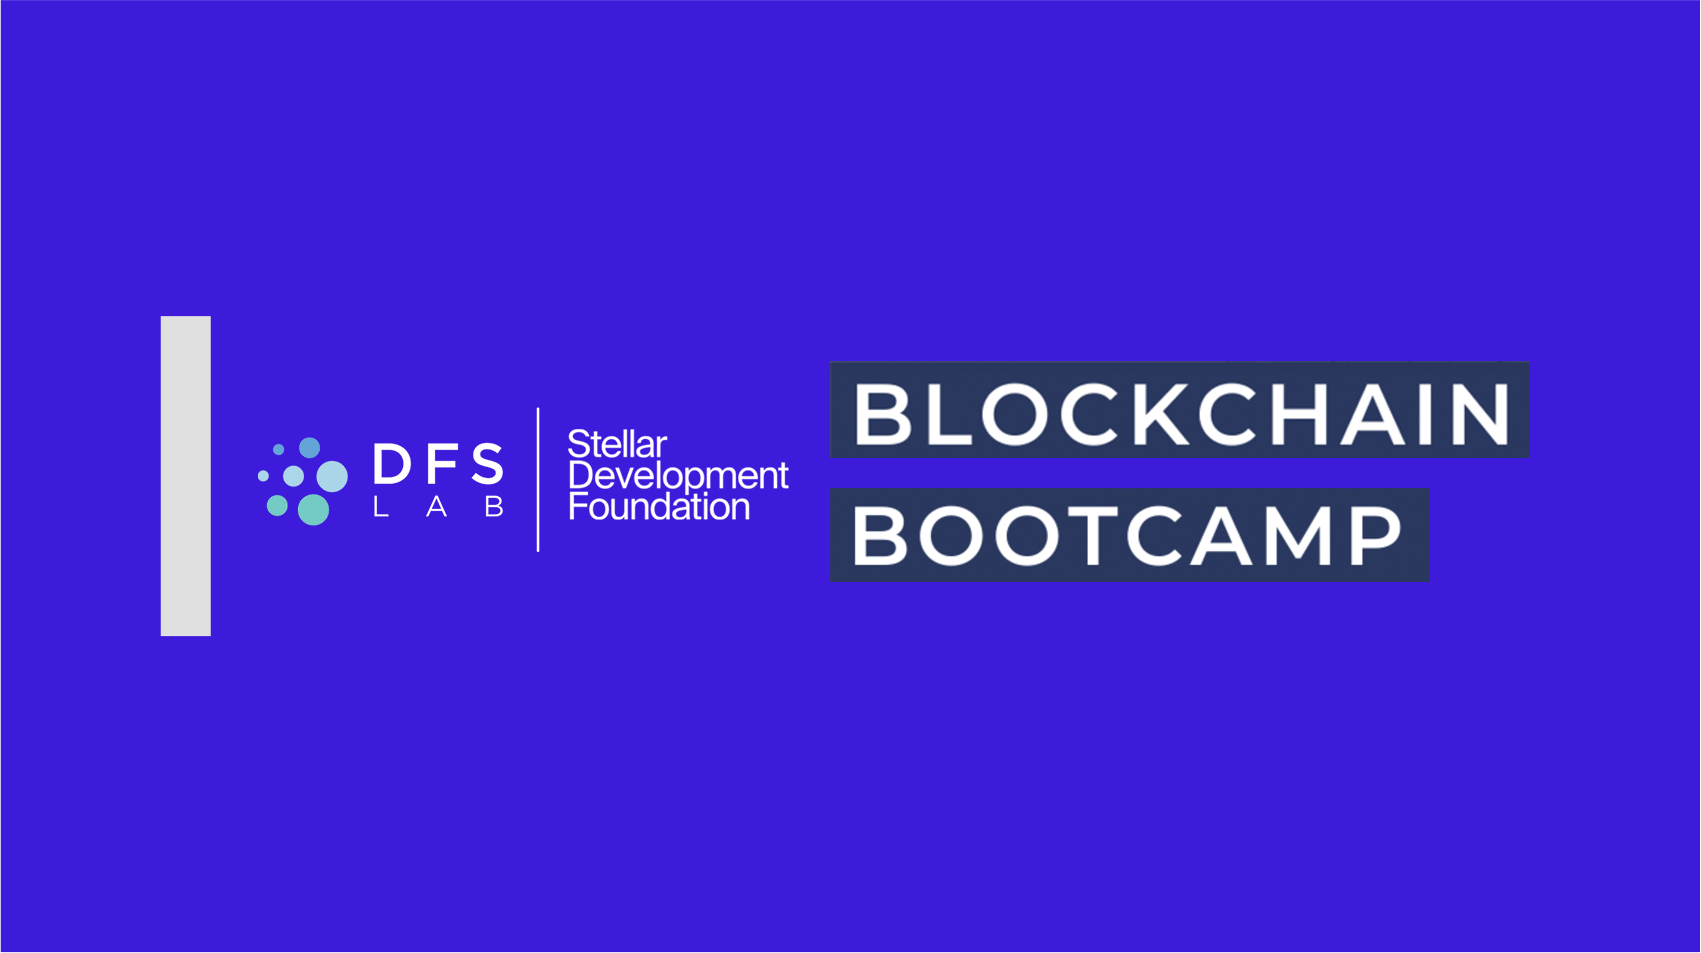 DFS Lab & Stellar Blockchain Bootcamp 2022 for Early to Mid-stage Startups in Africa